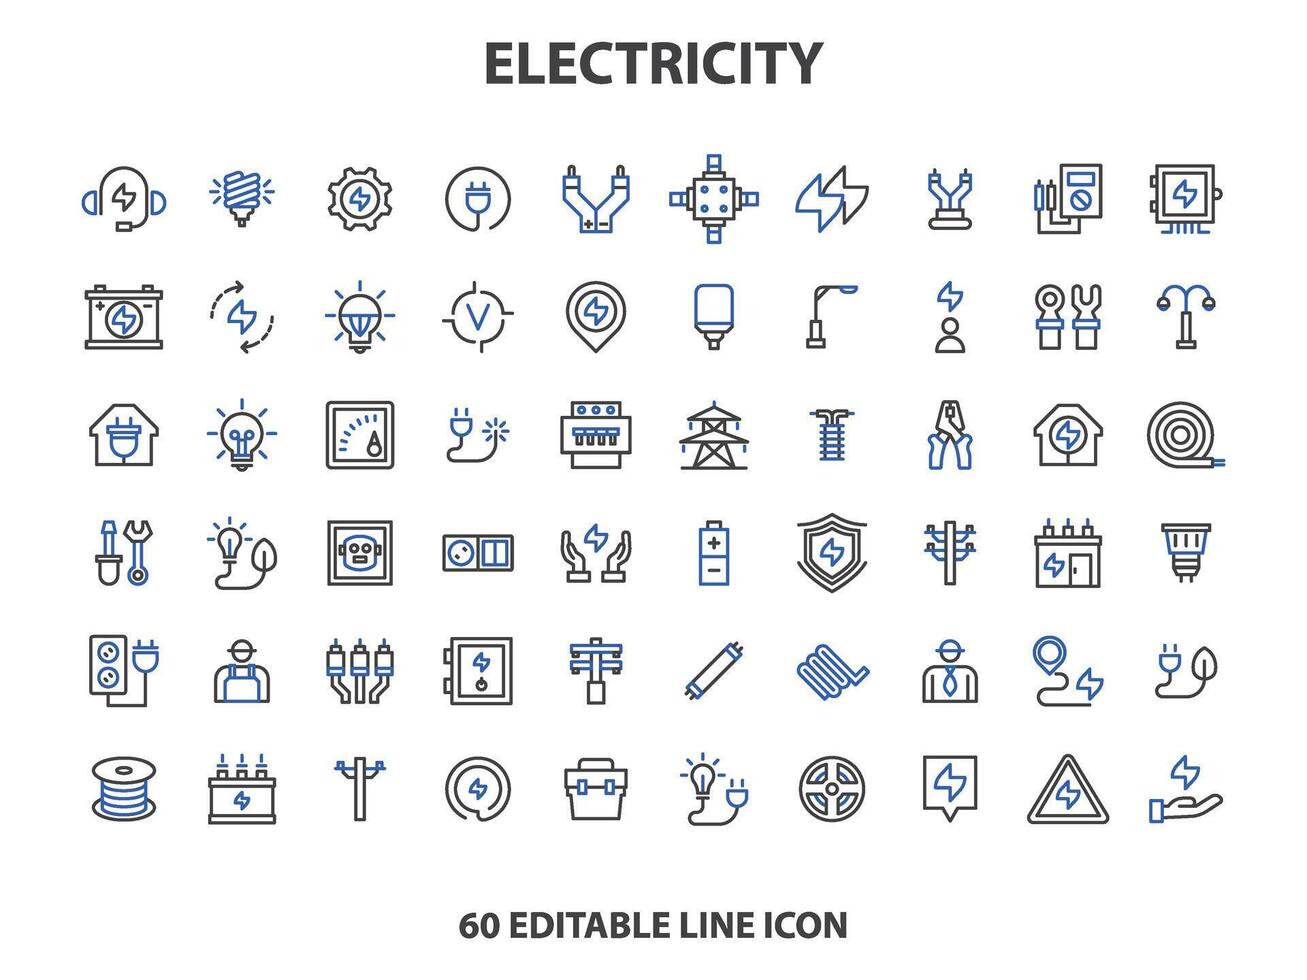 Electricity icon set. Collection of renewable energy, ecology and green electricity icons. Vector illustration.